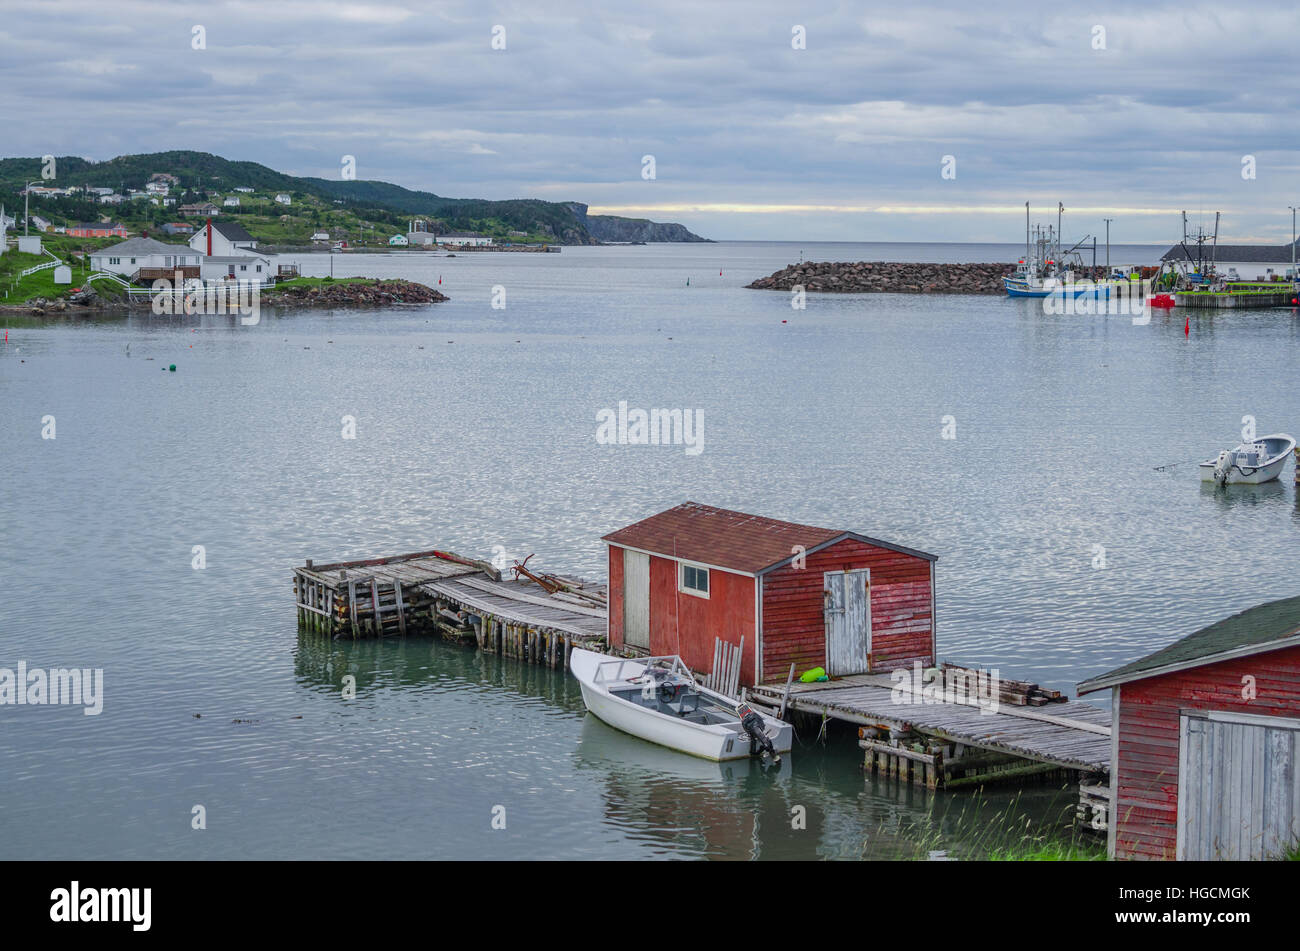 Little red shack on a dock in the small village and community of Twillingate, Newfoundland. Stock Photo